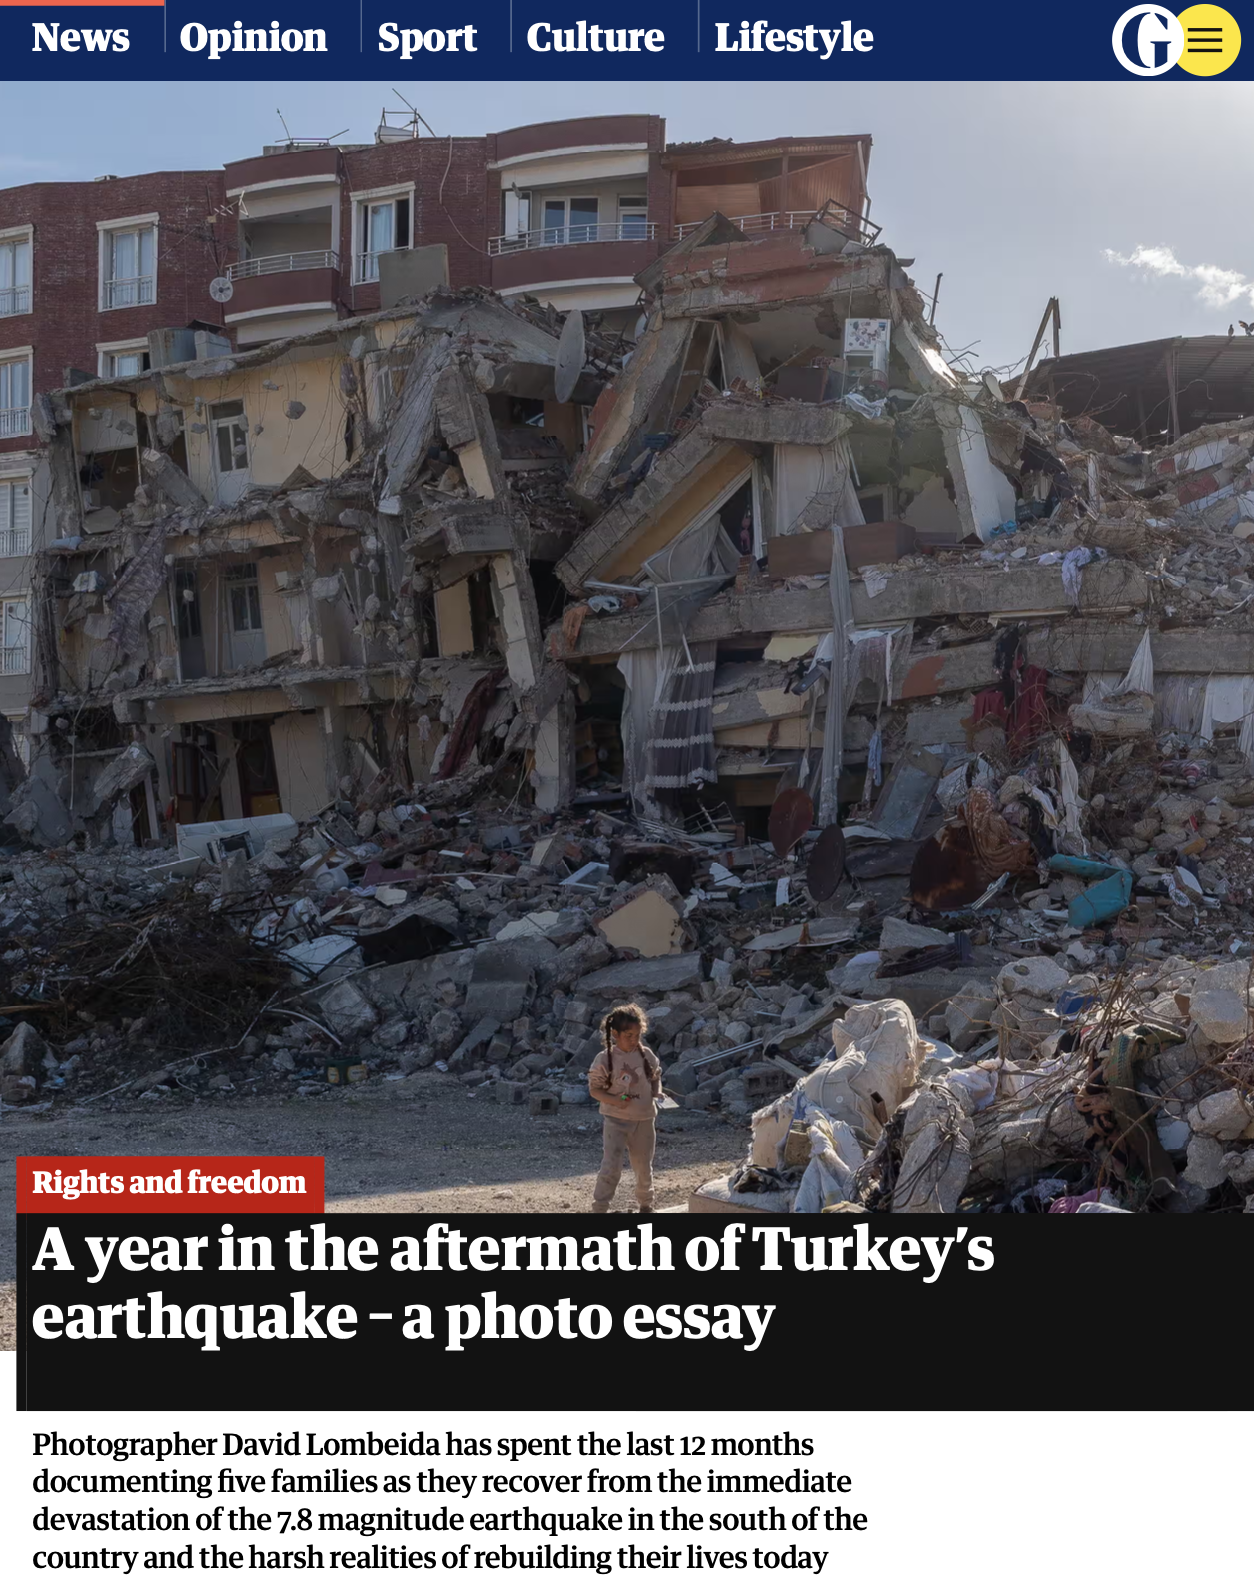 The Guardian: A year in the aftermath of Turkey’s earthquake